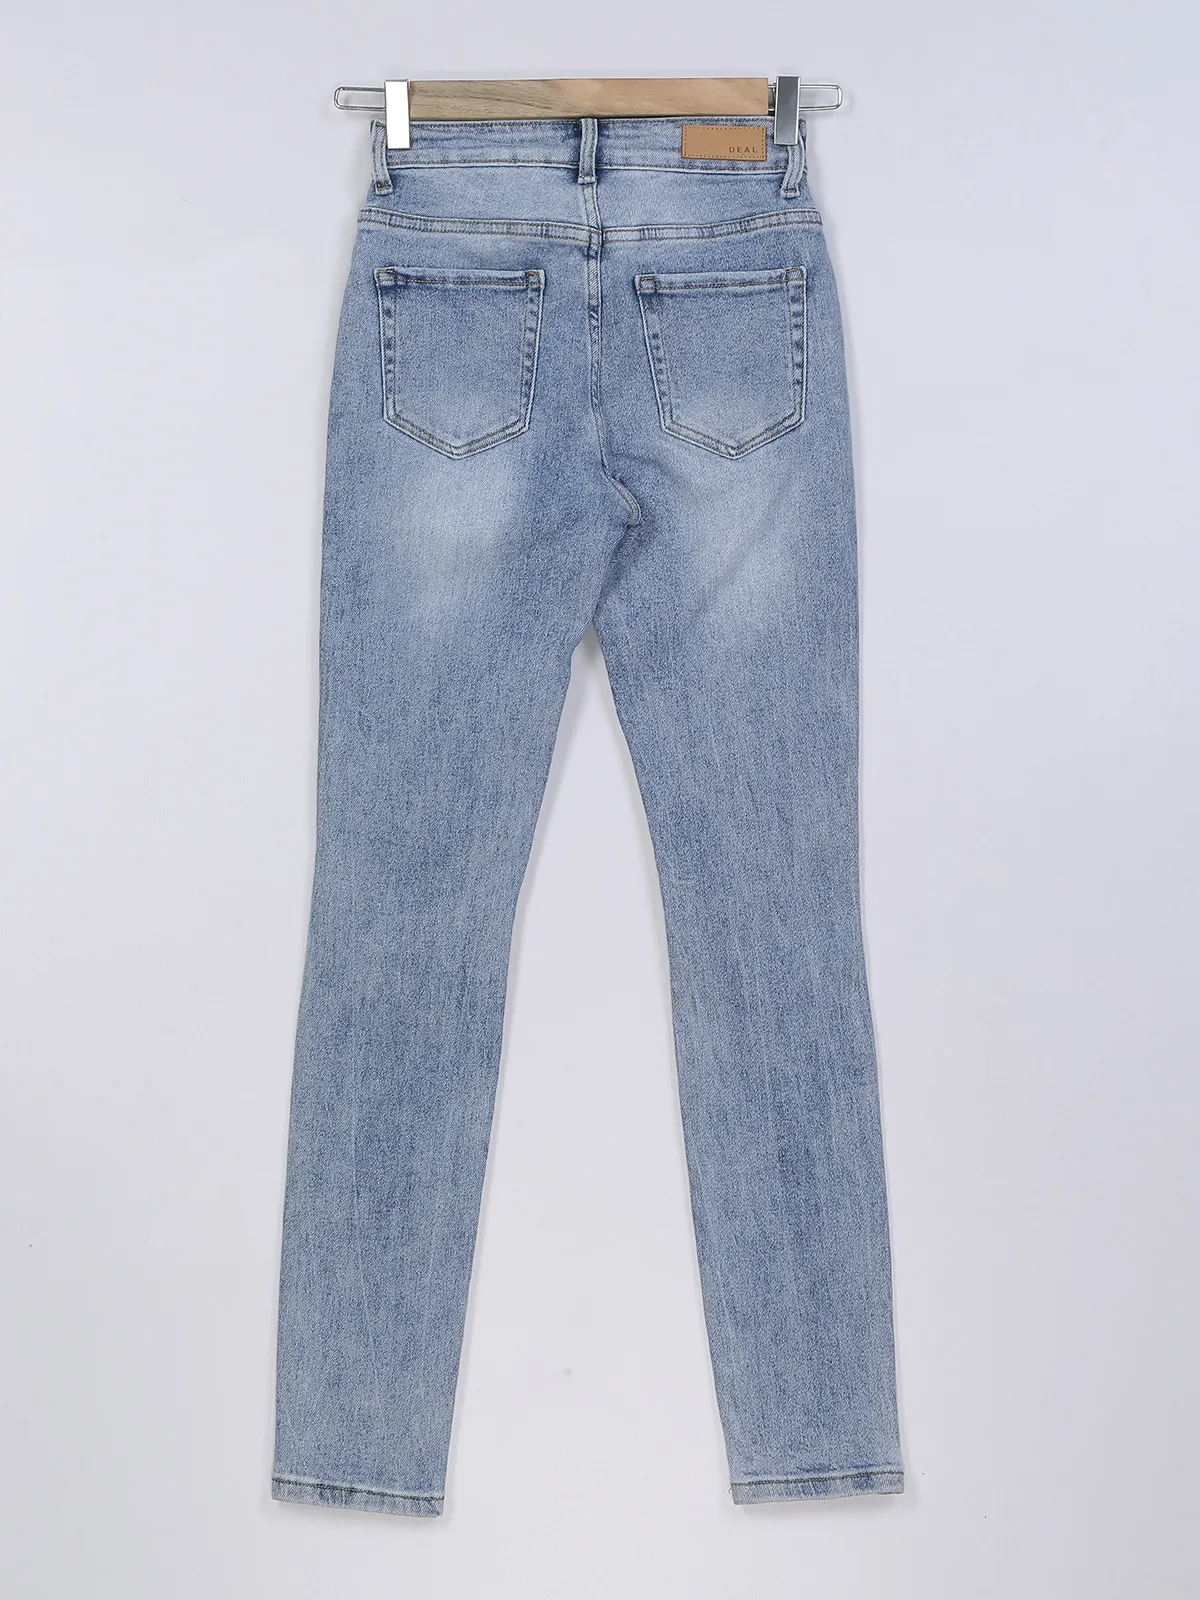 Deal washed and ripped light blue jeans